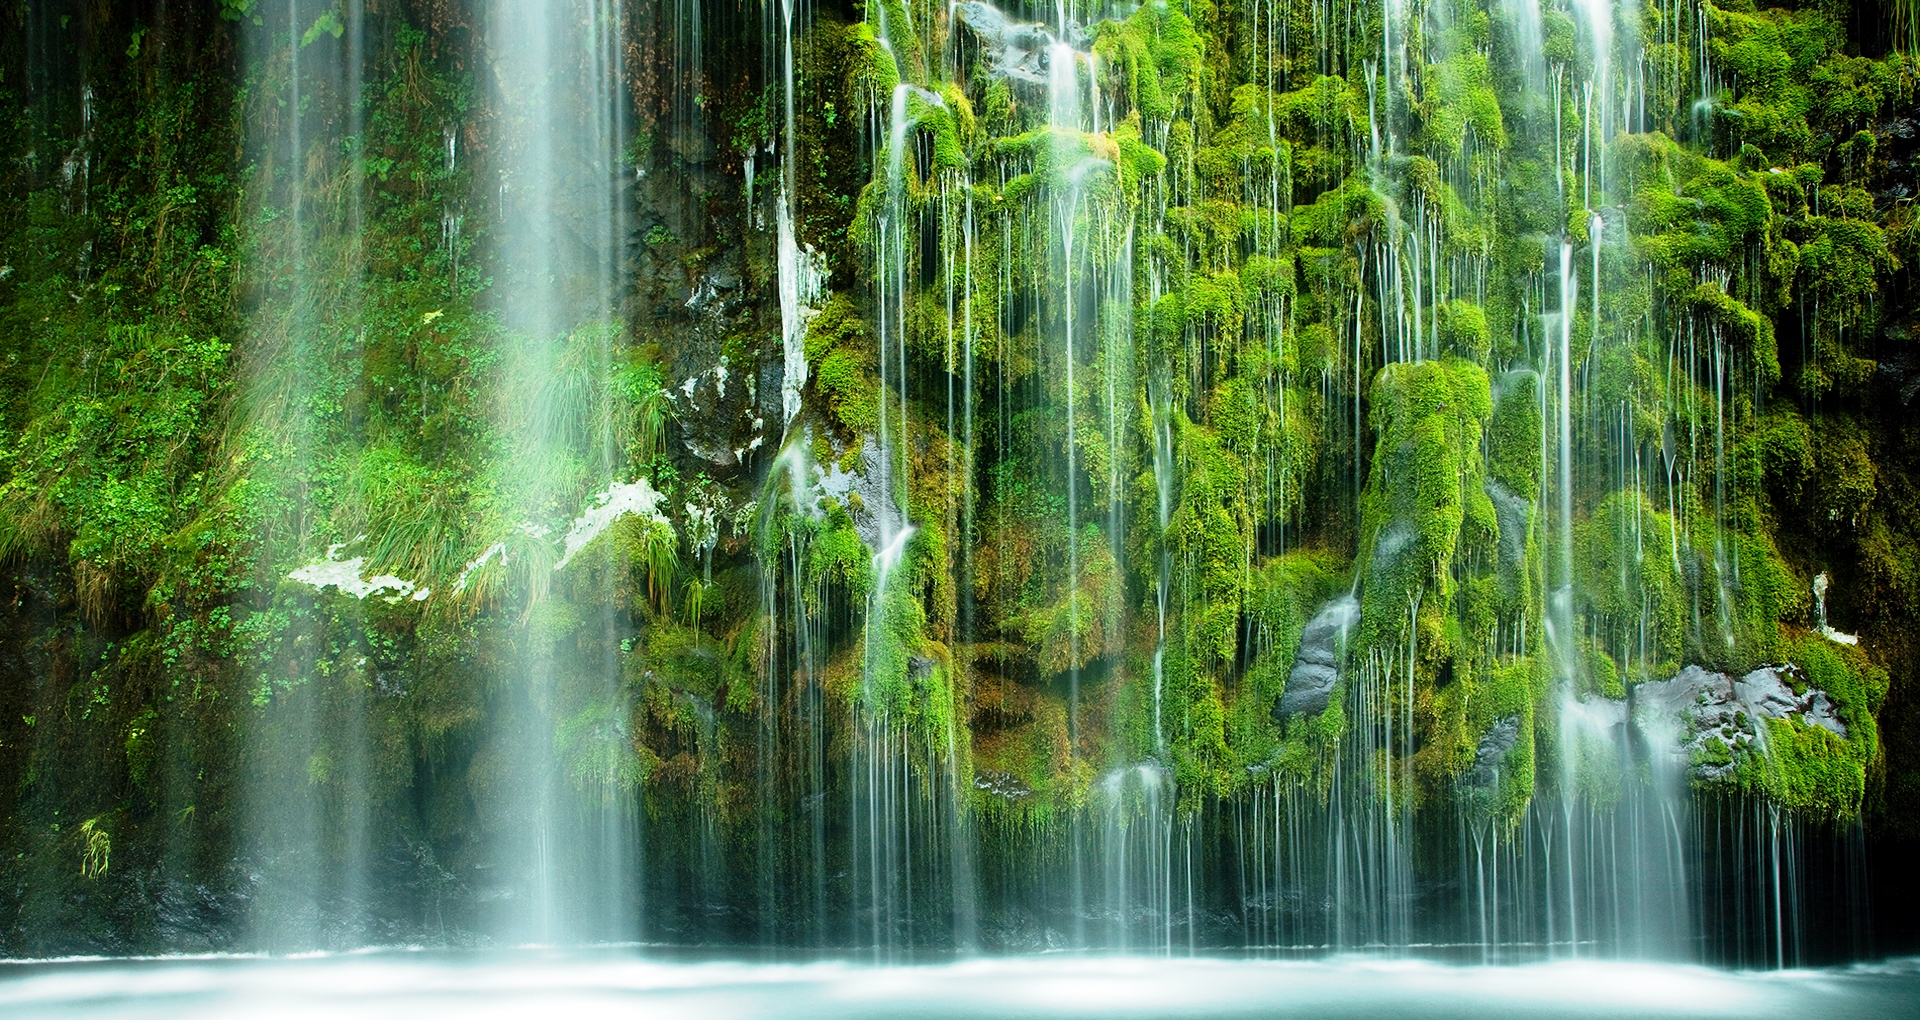 Cool Wallpaper Hd Download Waterfall Images